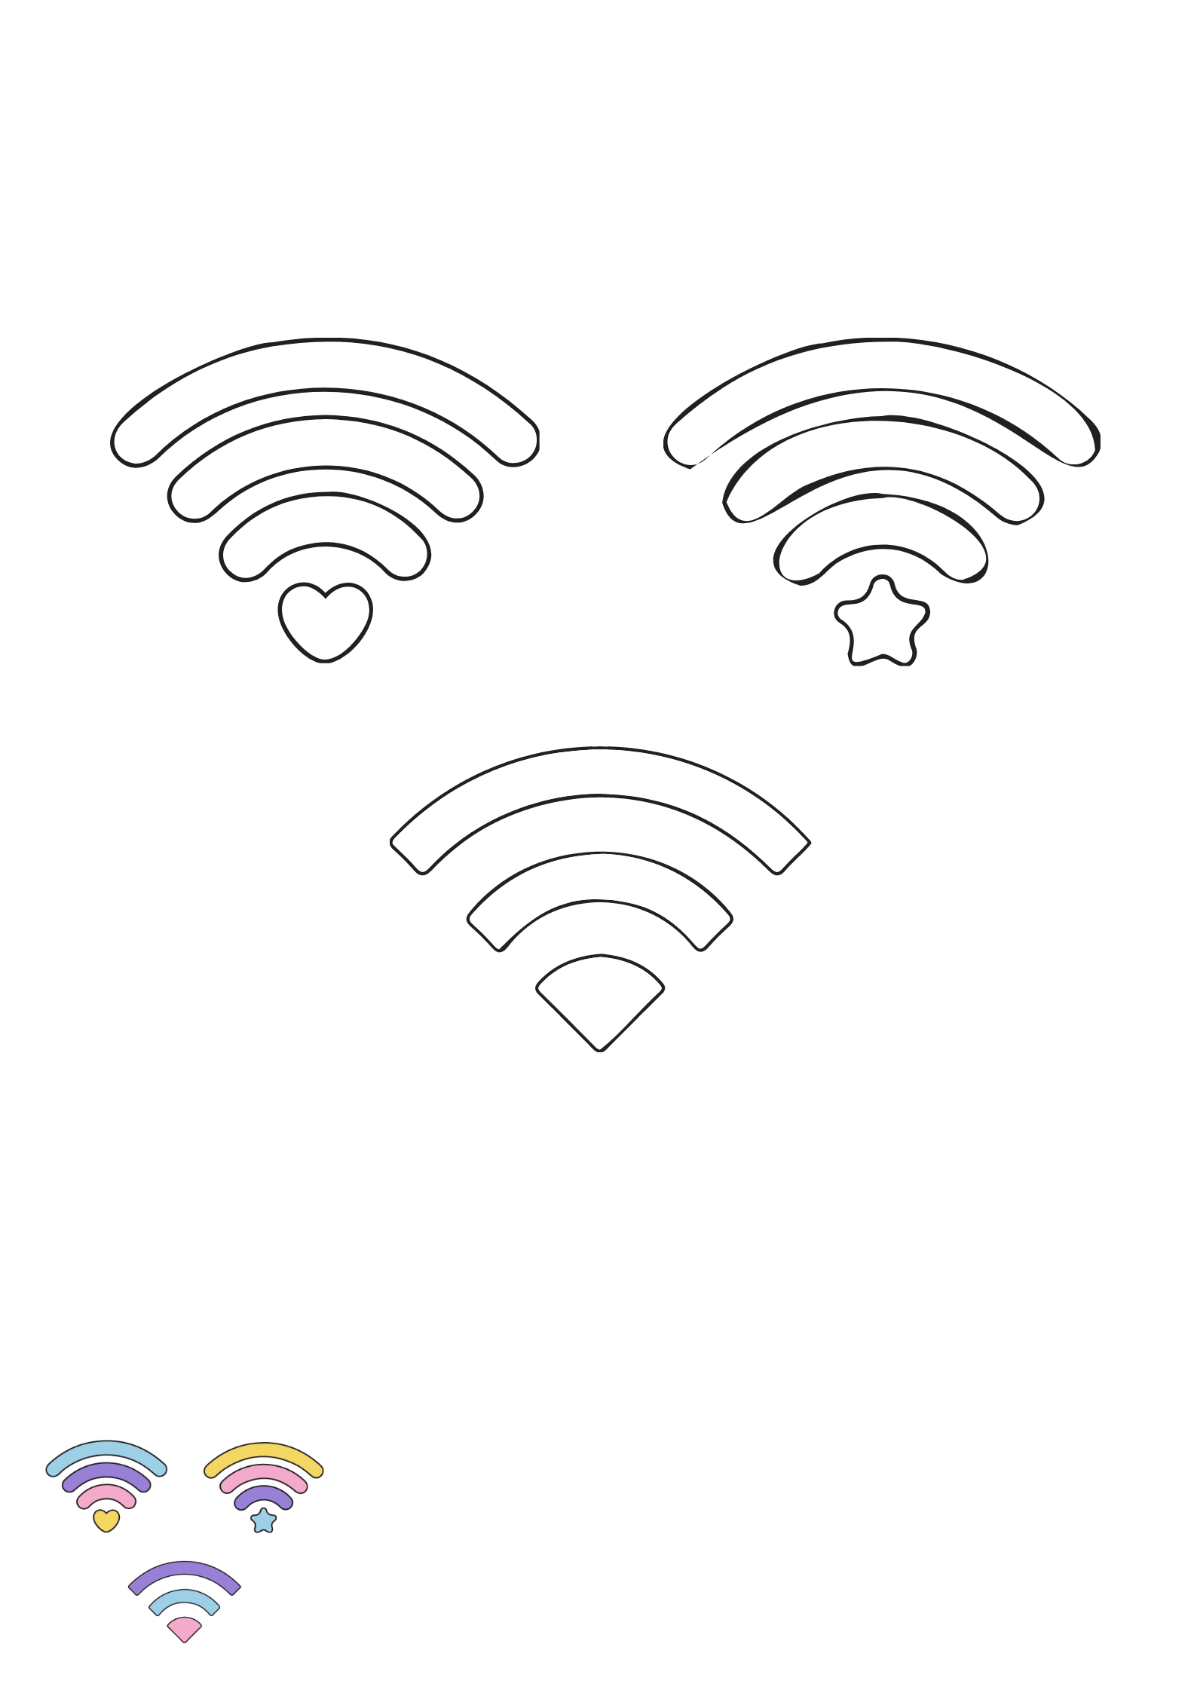 Cute Wifi Symbol coloring page Template